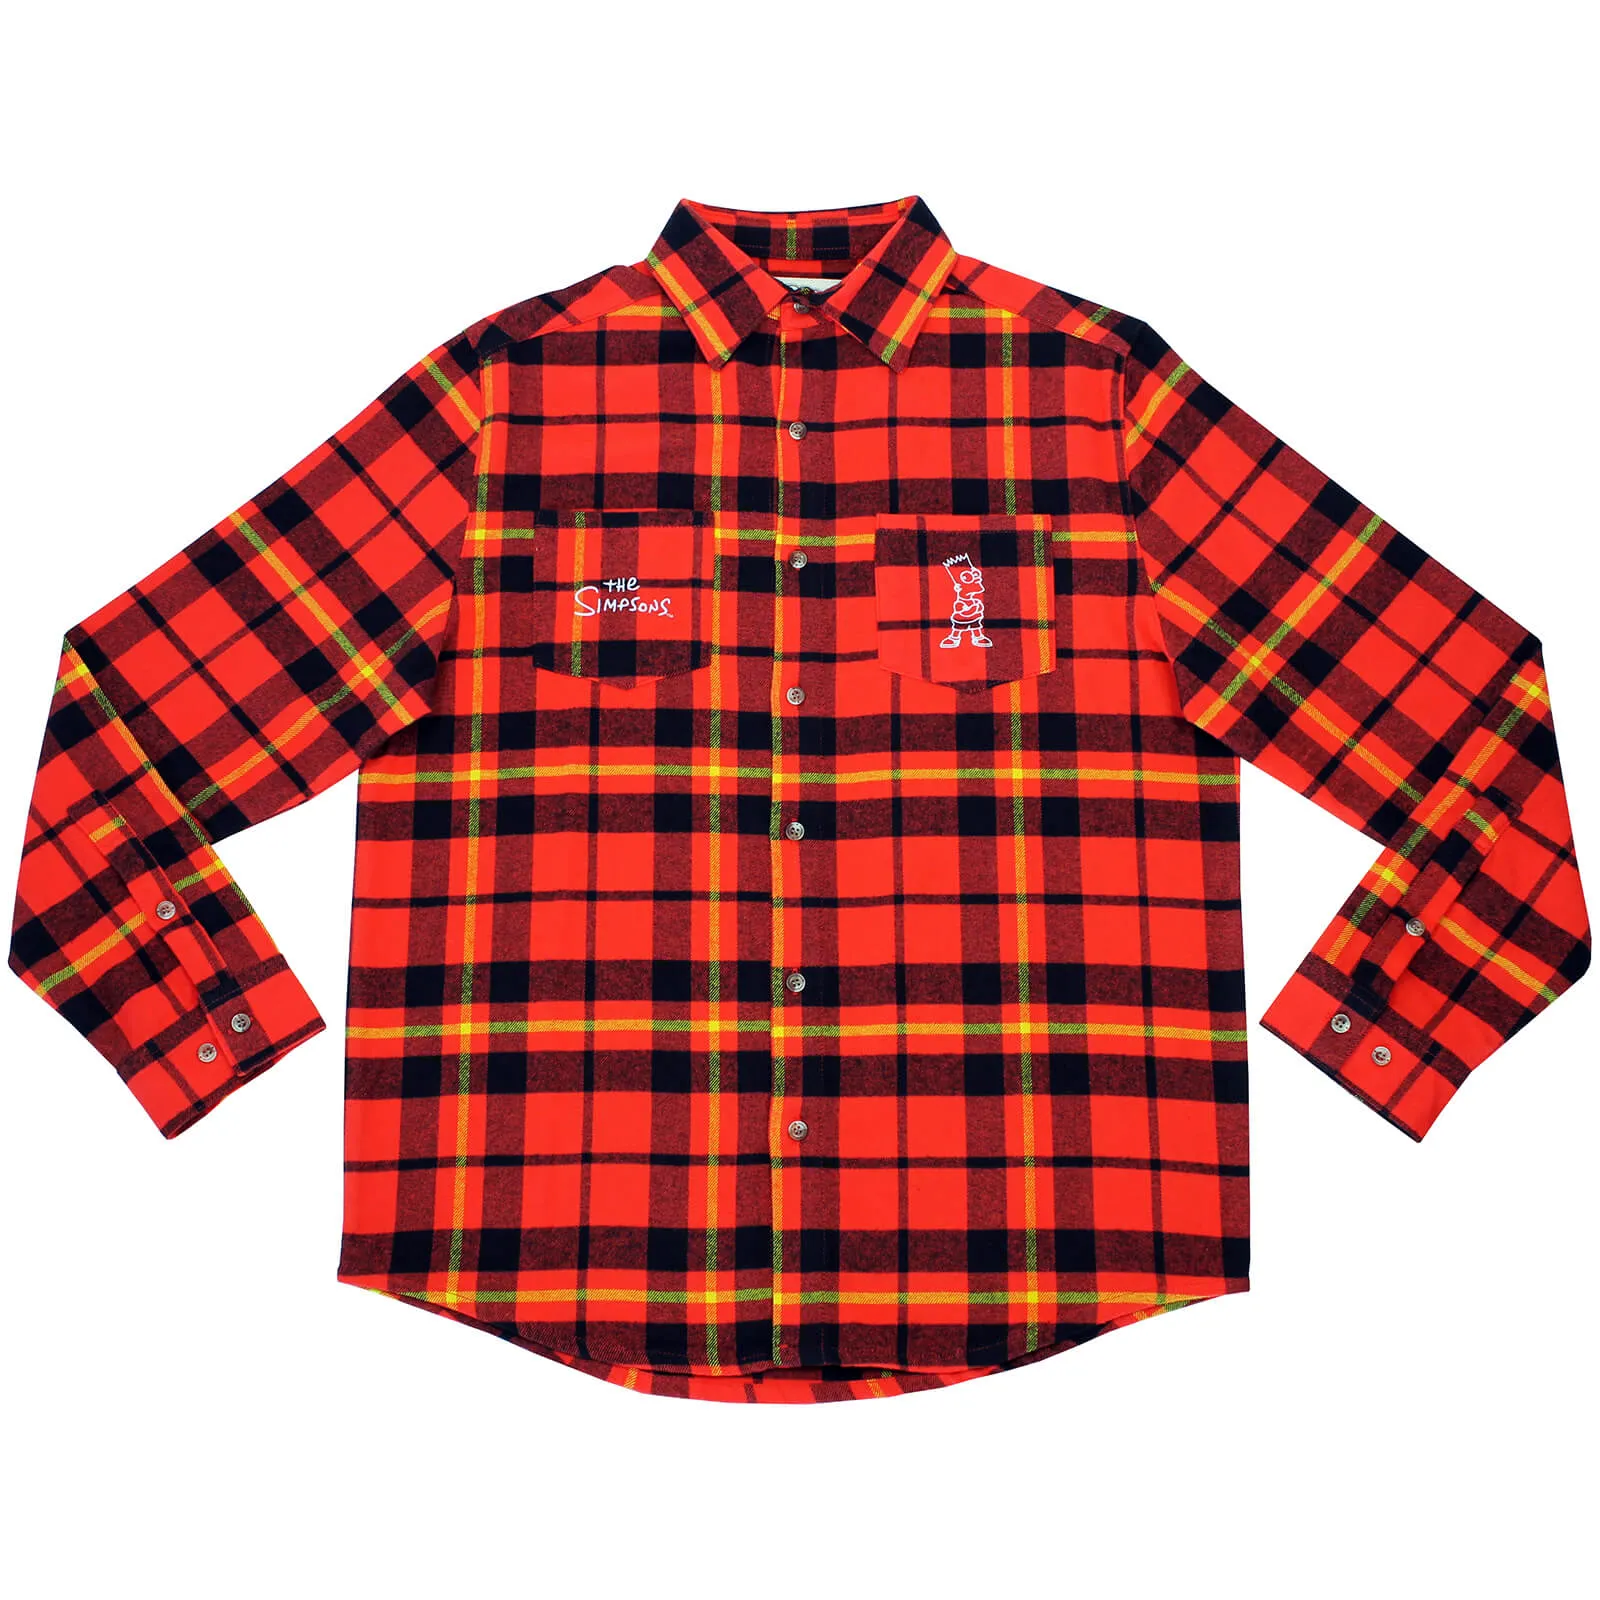  x The Simpsons - Bart Simpson Flannel Shirt - S